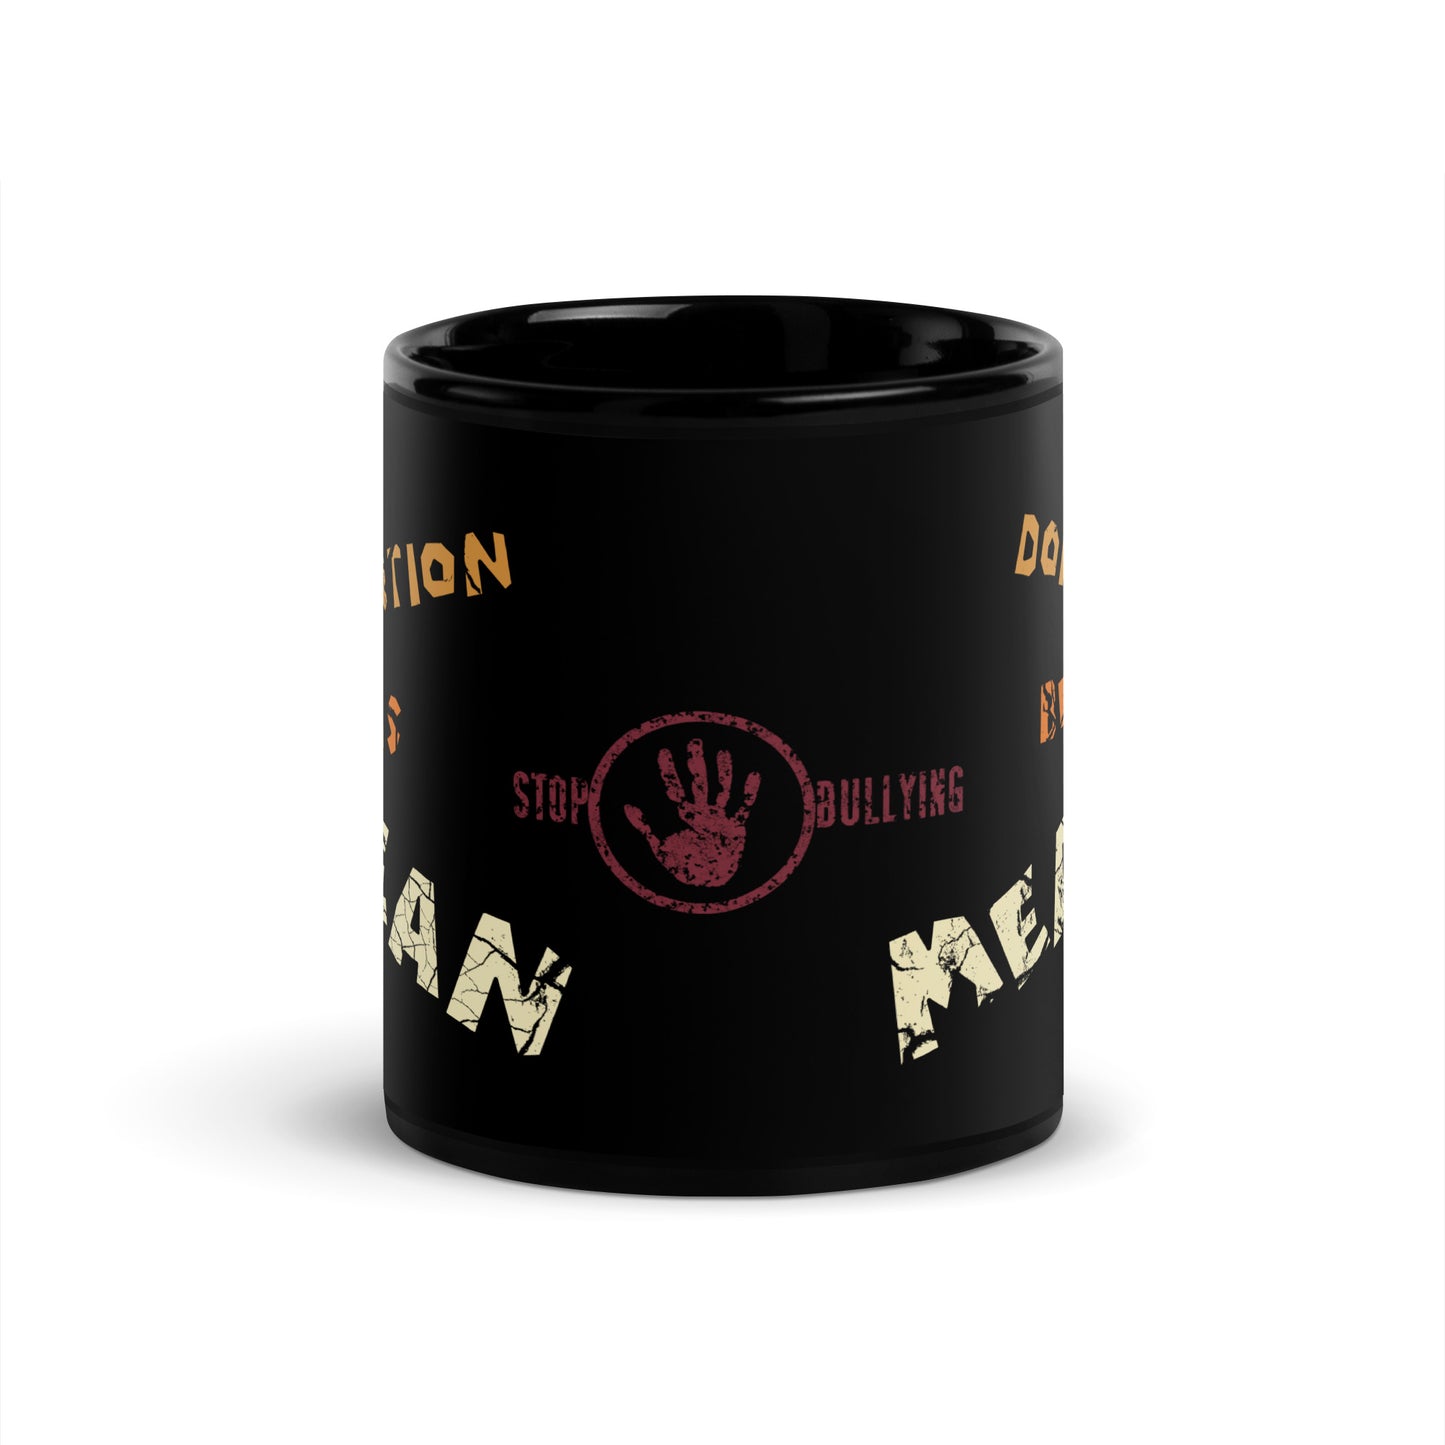 A001 Mug - Black Glossy Ceramic Mug Featuring Stop-Hand Graphic with text “Abortion is Mean. Don’t be Mean.”